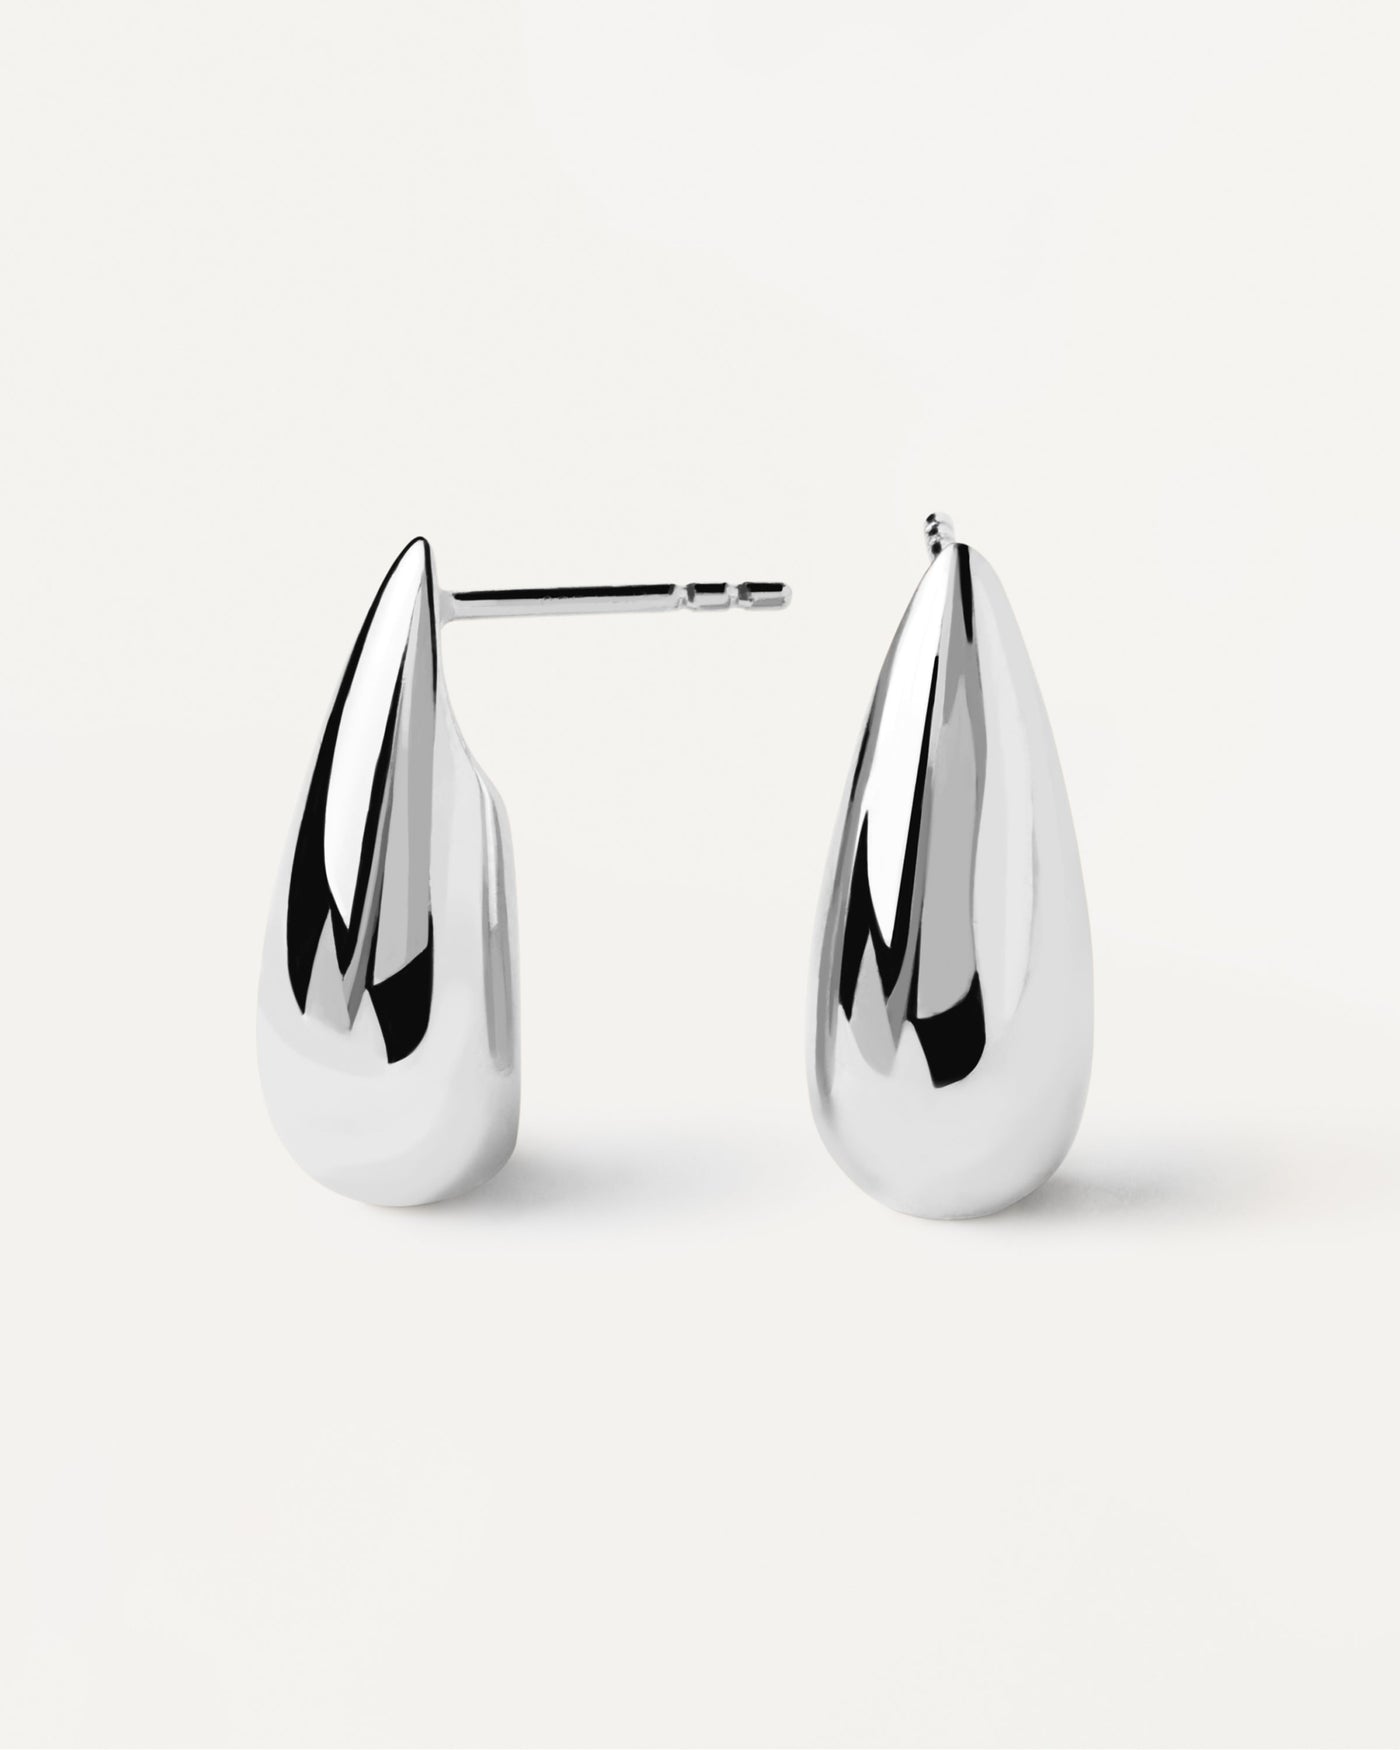 2023 Selection | Large Sugar Silver Earrings. Drop shaped stud earrings in sterling silver. Get the latest arrival from PDPAOLA. Place your order safely and get this Best Seller. Free Shipping.